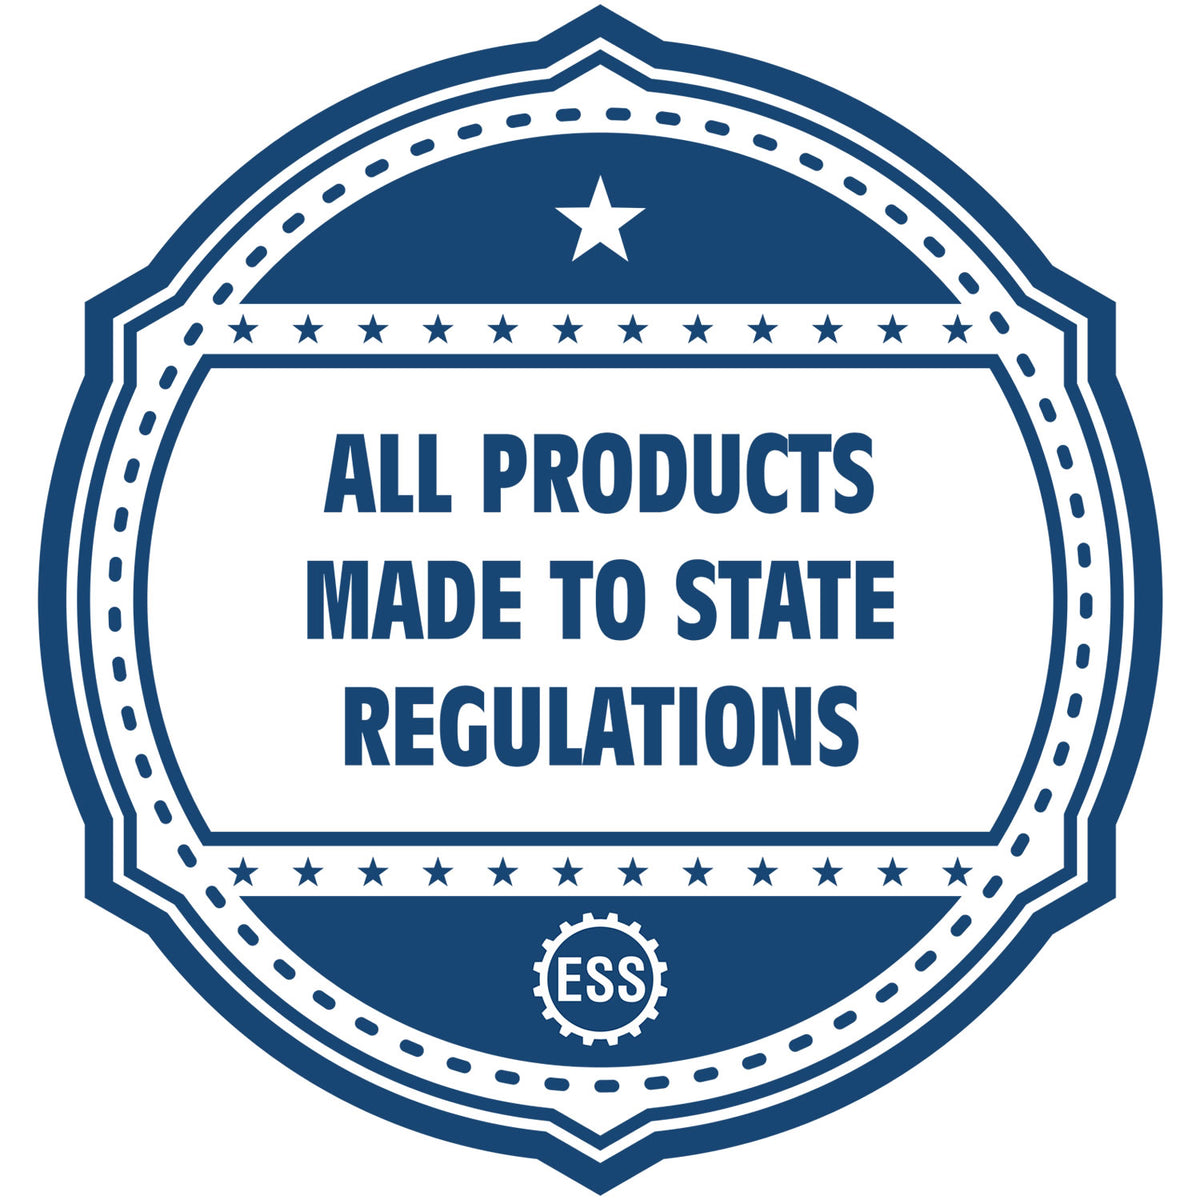 An icon or badge element for the Slim Pre-Inked Rectangular Notary Stamp for South Dakota showing that this product is made in compliance with state regulations.